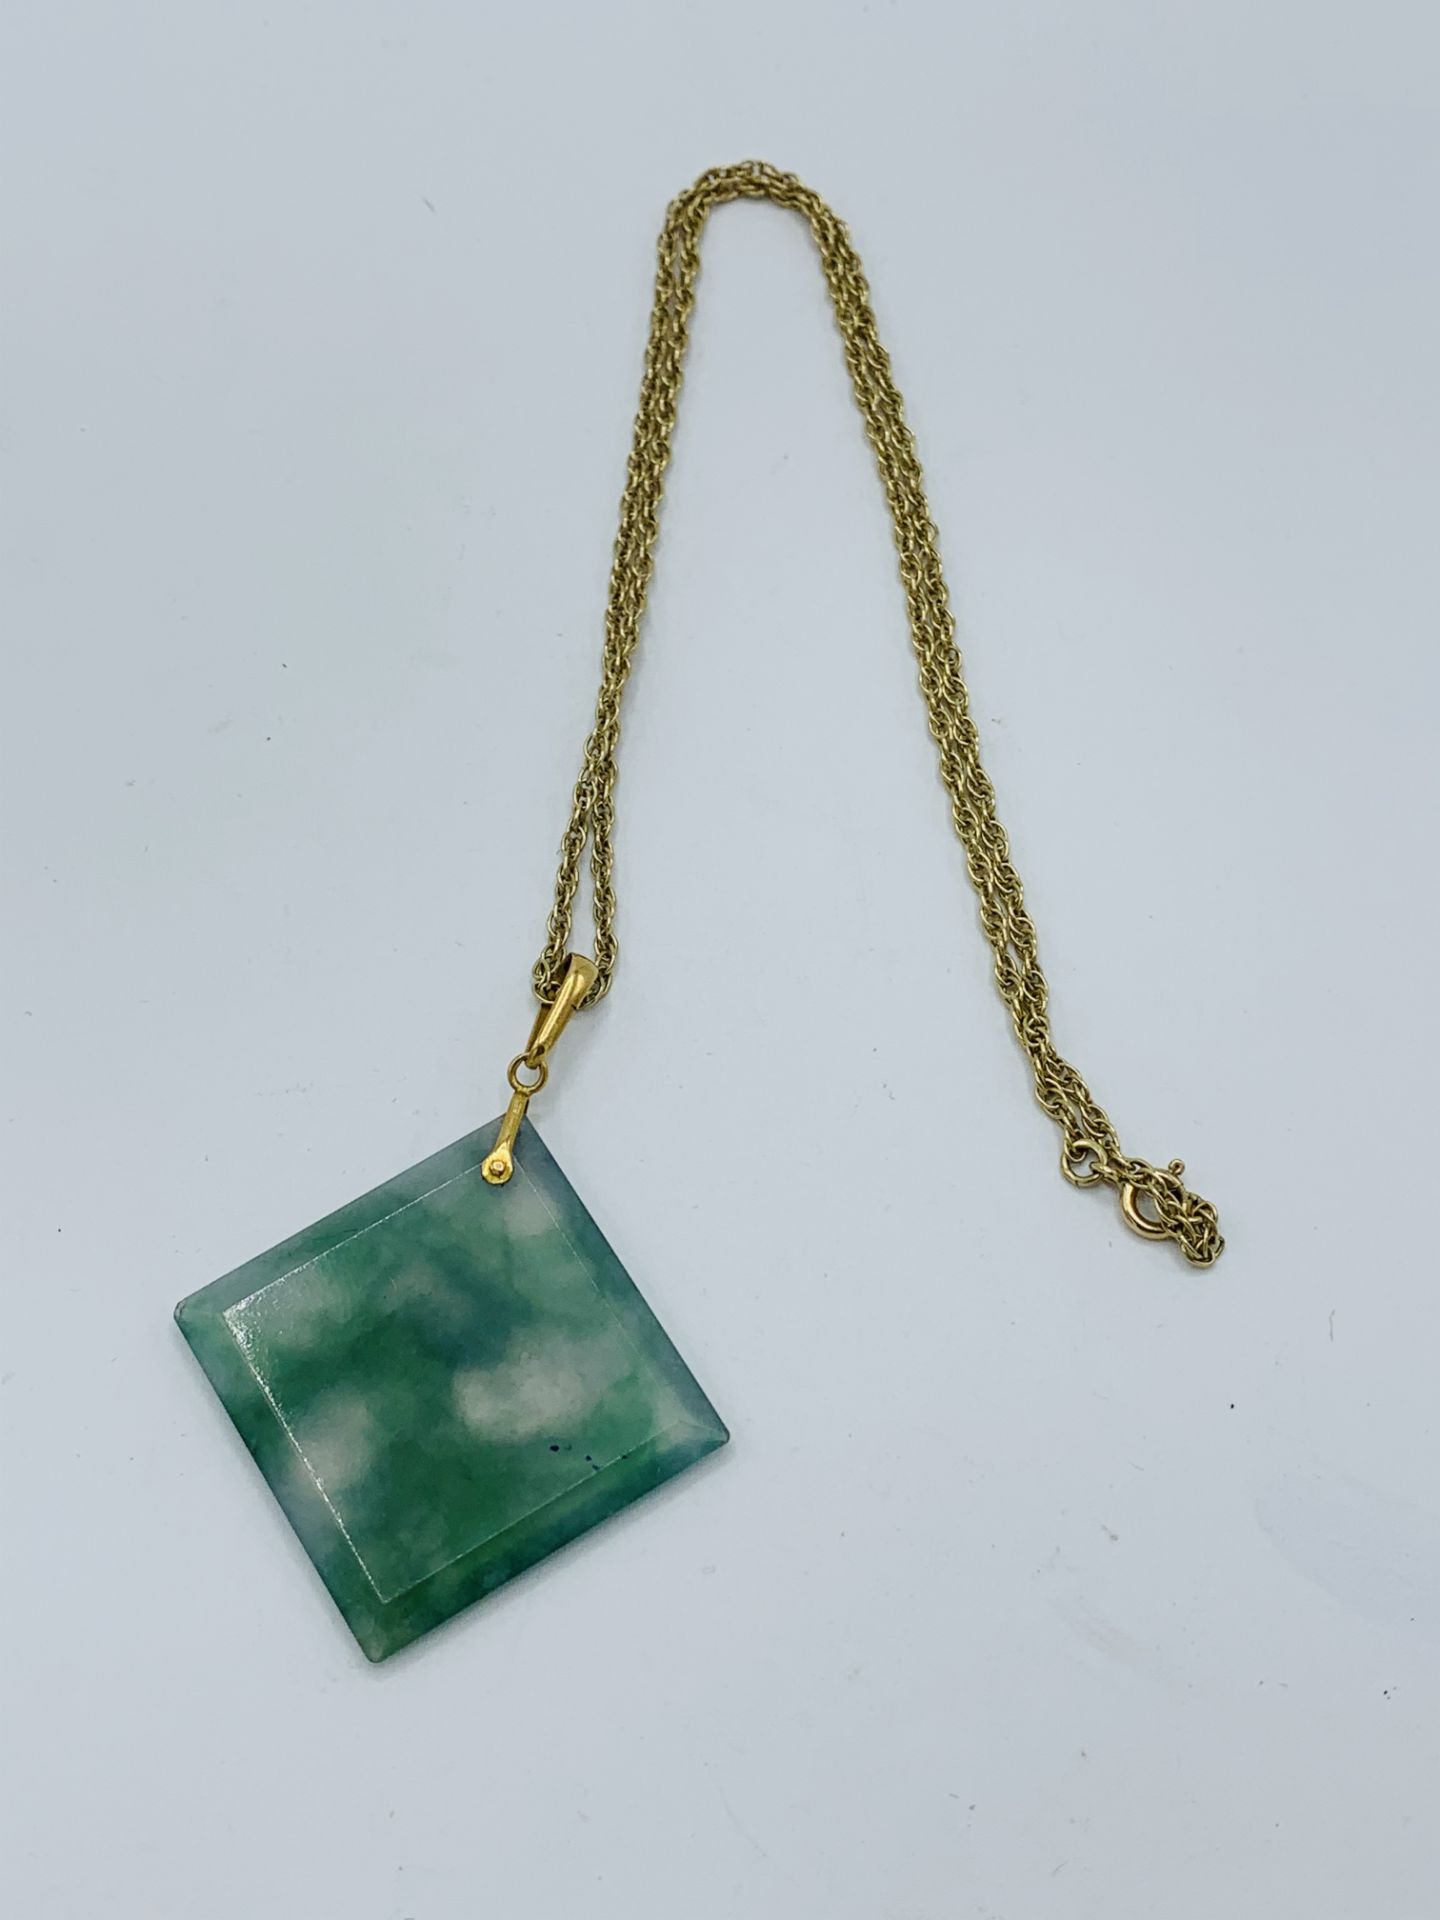 Square cut pendant of moss agate with gold bale and 9ct gold chain.